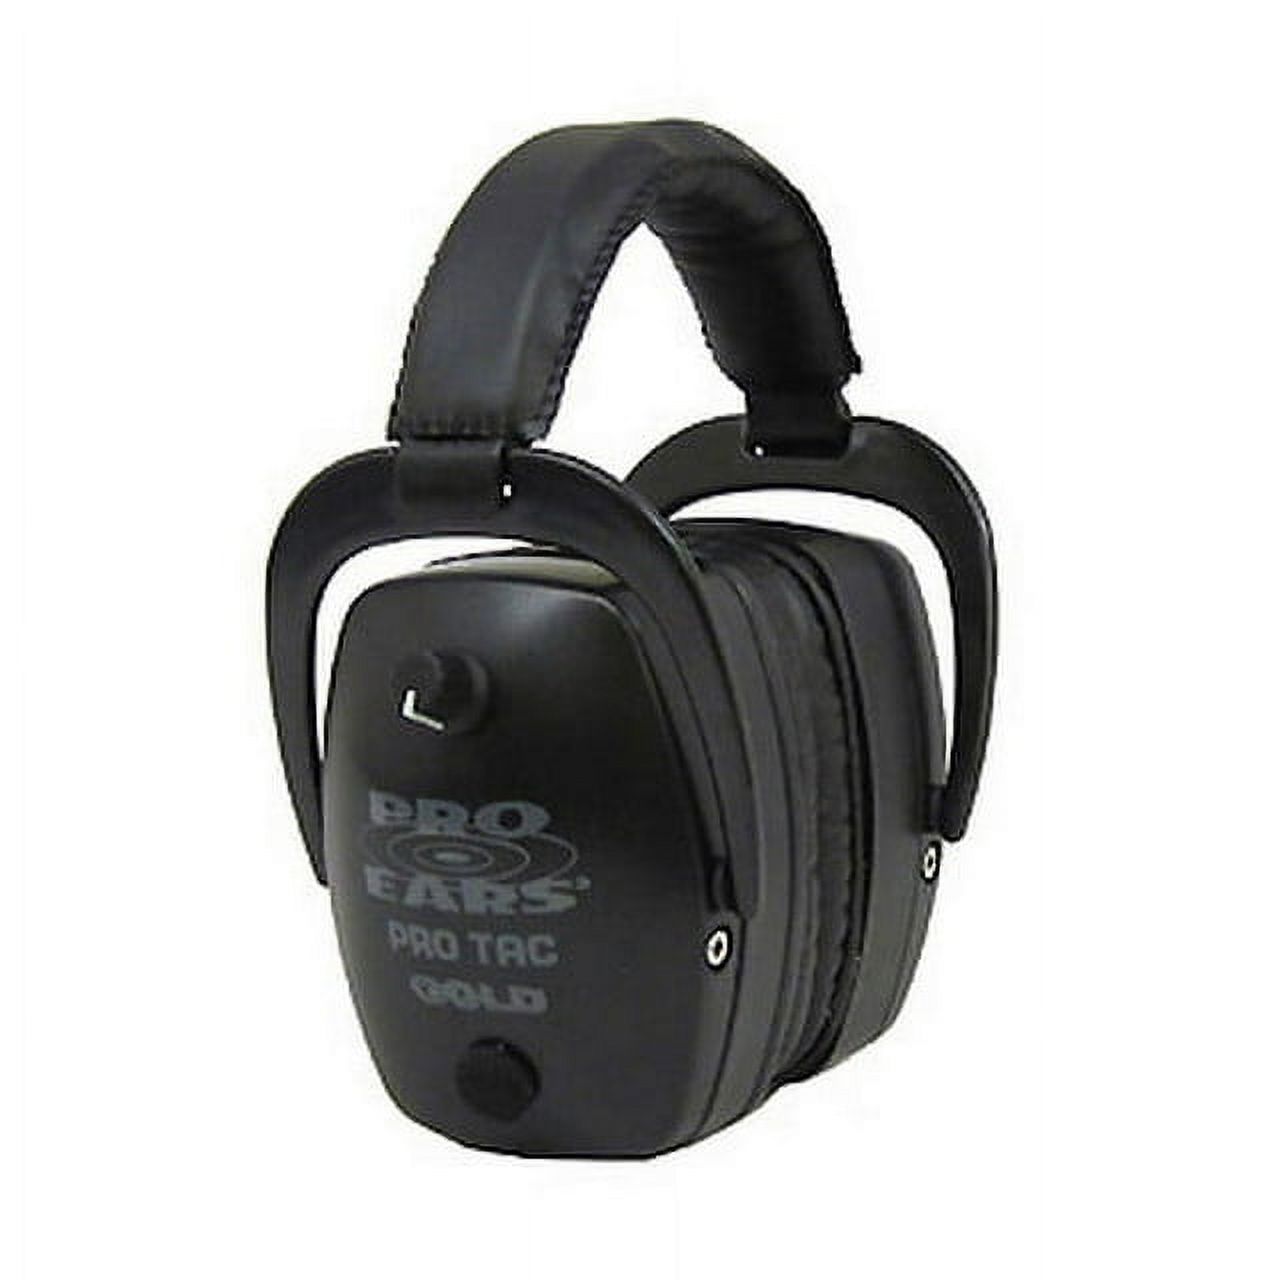 Pro Ears Pro Tac Mag Gold, NRR 30 Hearing Protection Earmuffs w/Lithium Batterie - image 1 of 2